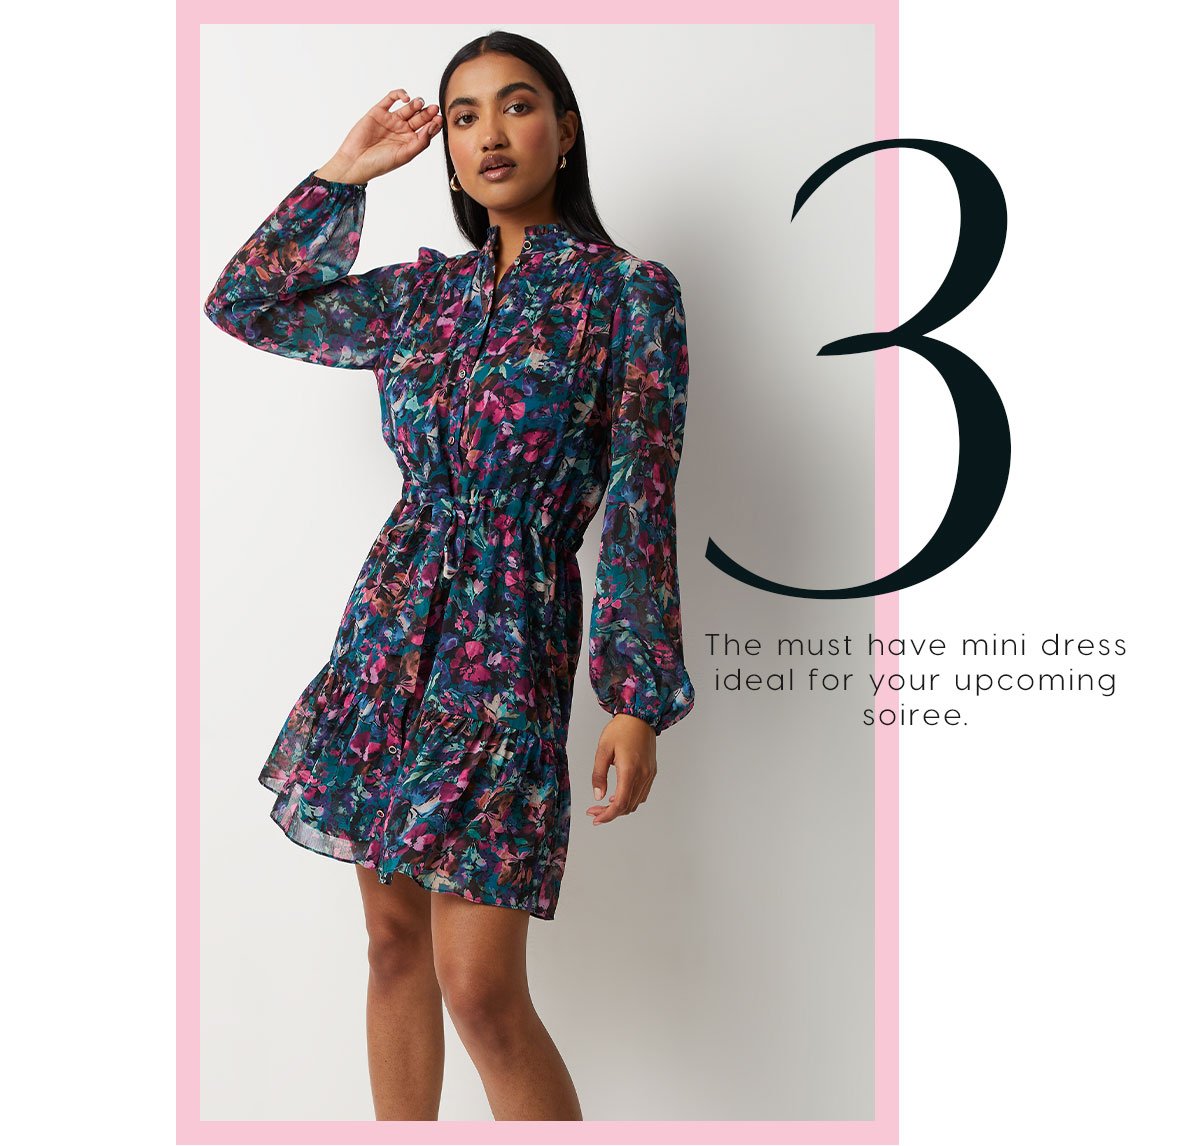 3. The must have mini dress ideal for your upcoming soiree.